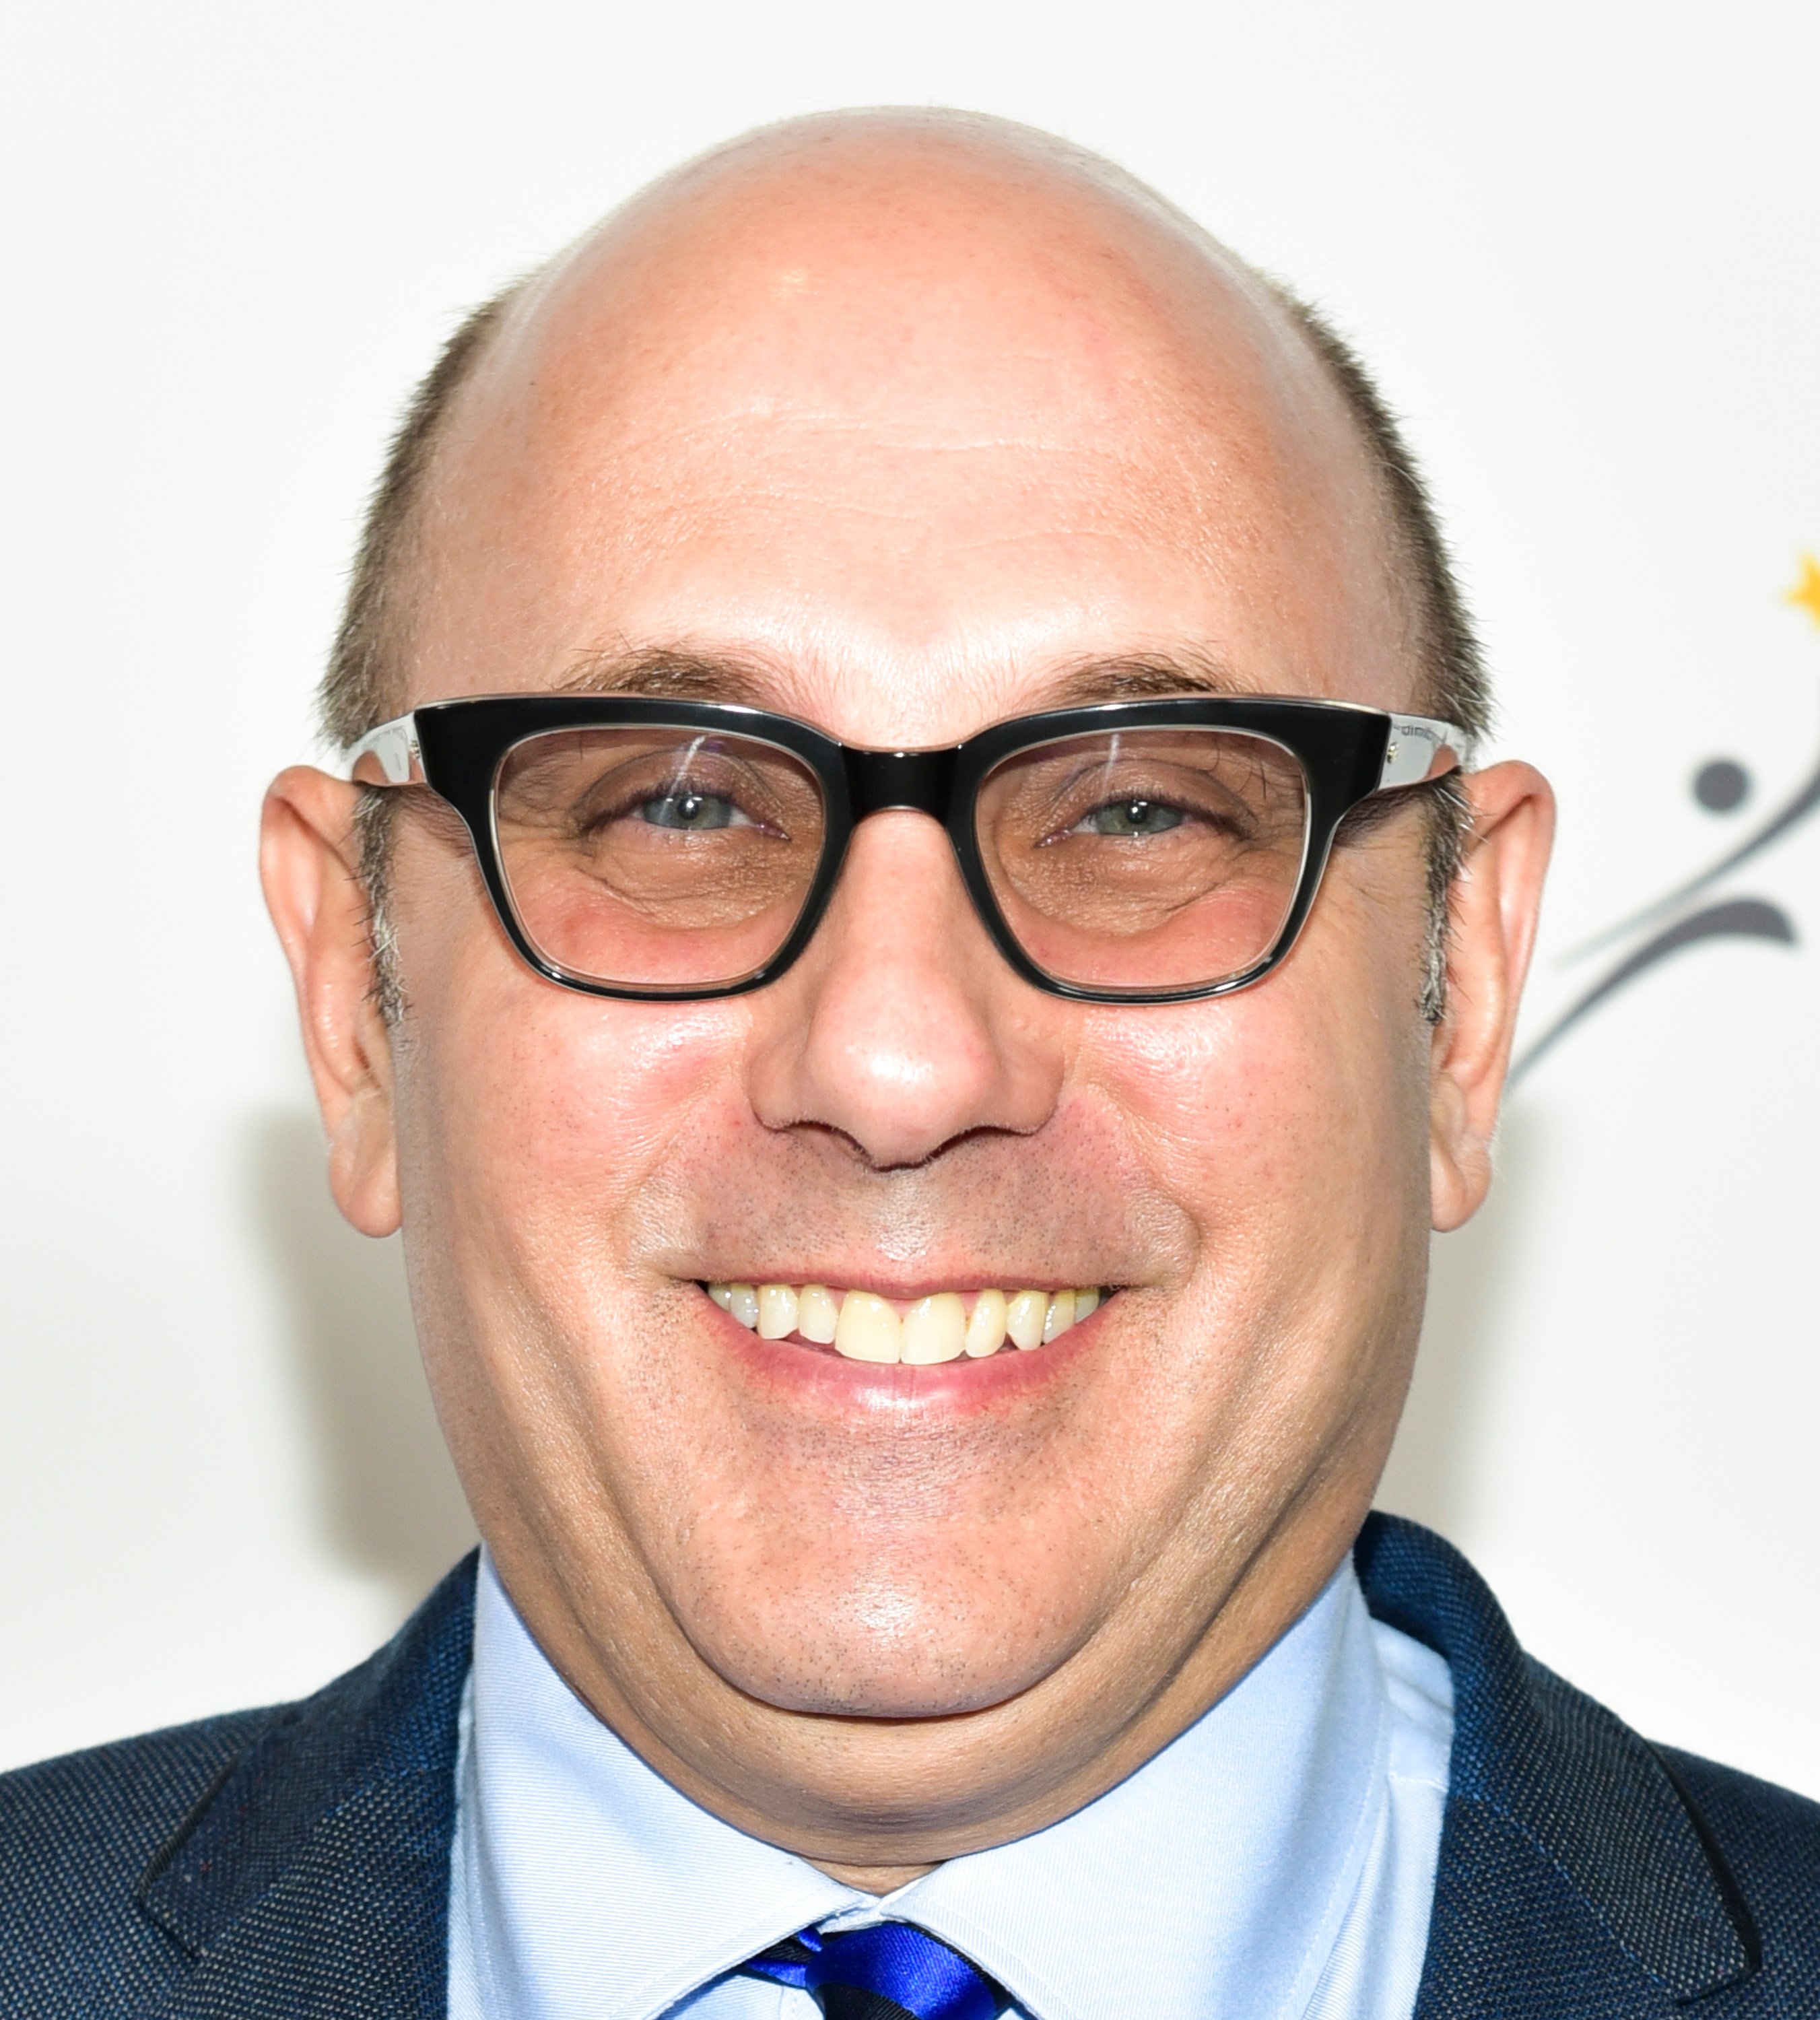 Willie Garson attends the Extraordinary Families 3rd Annual Awards Gala in 2018